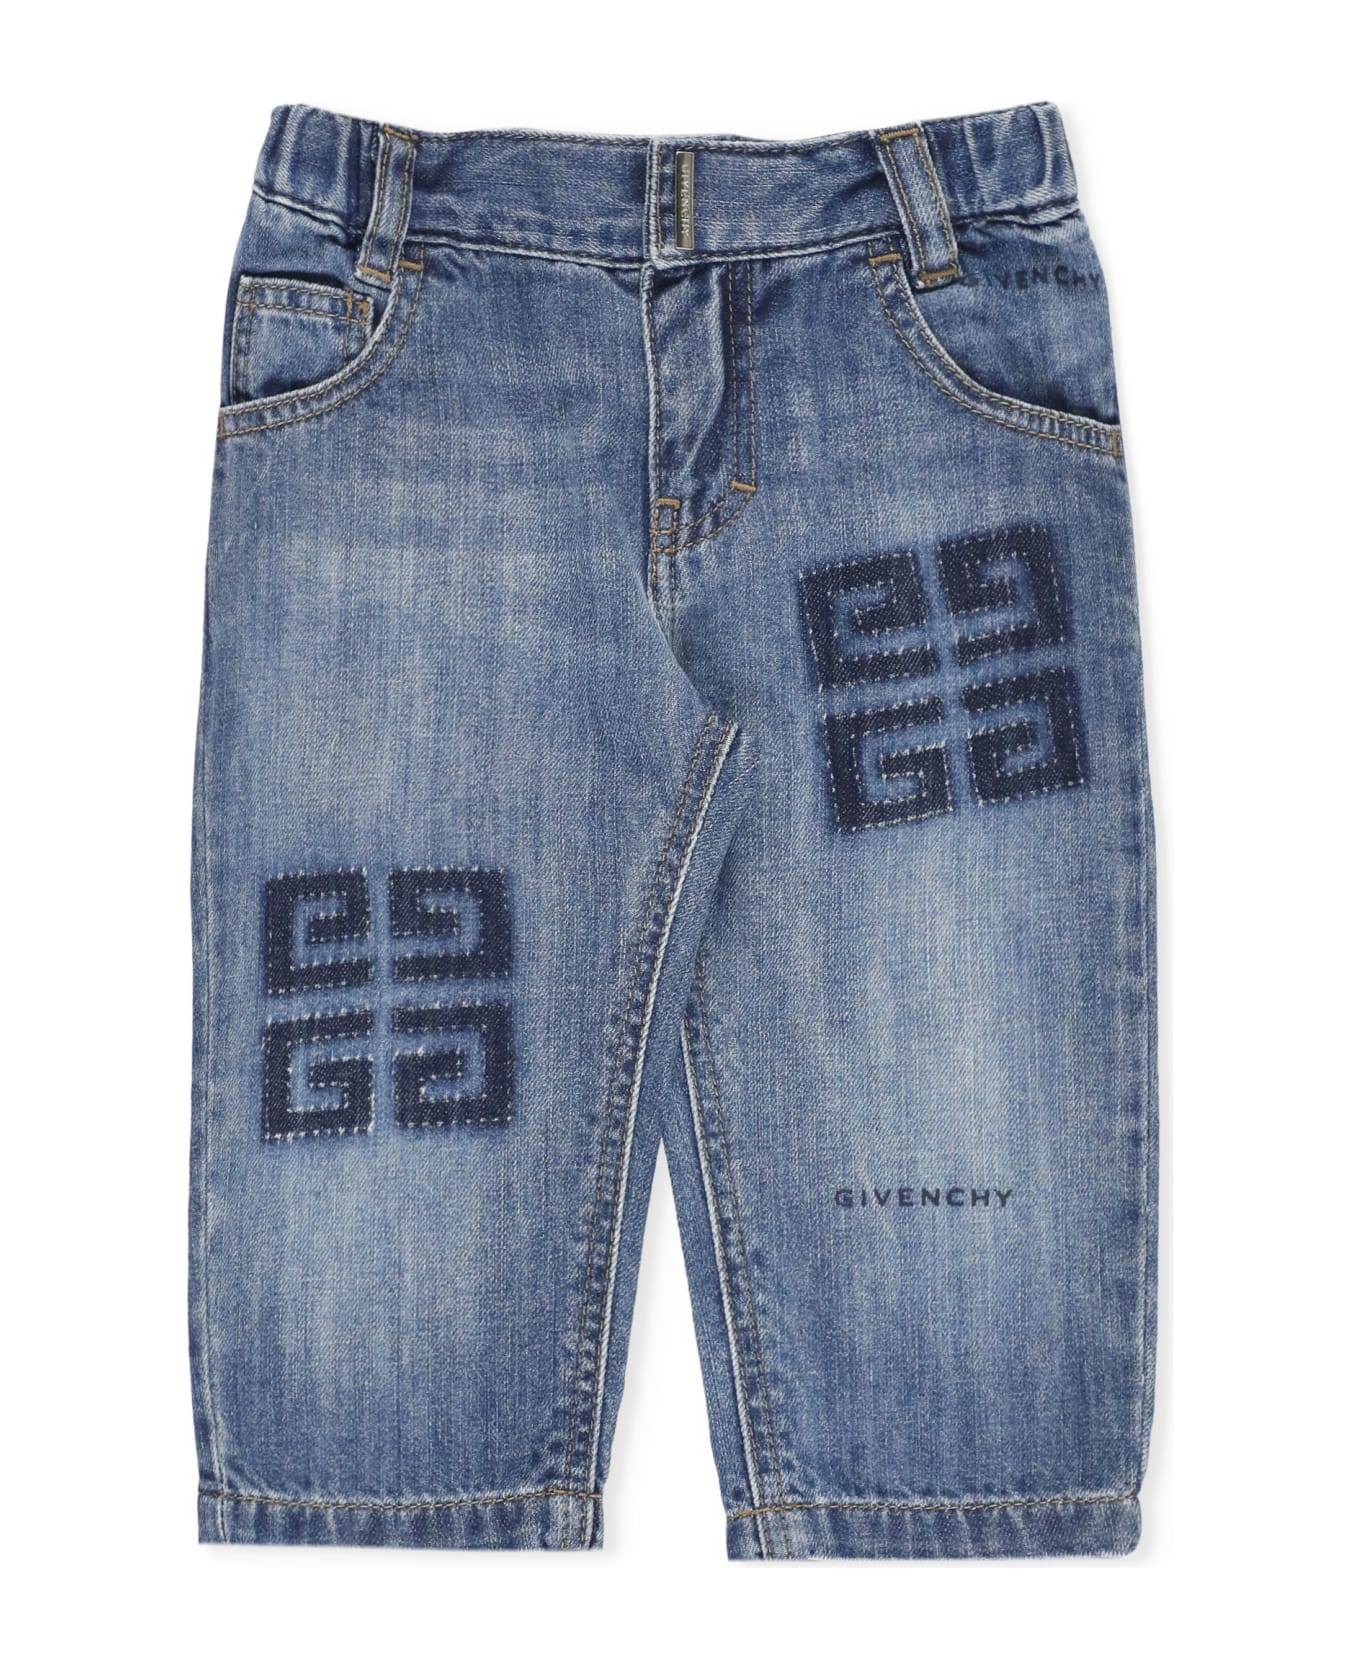 Givenchy Cotton Jeans - Blue ボトムス